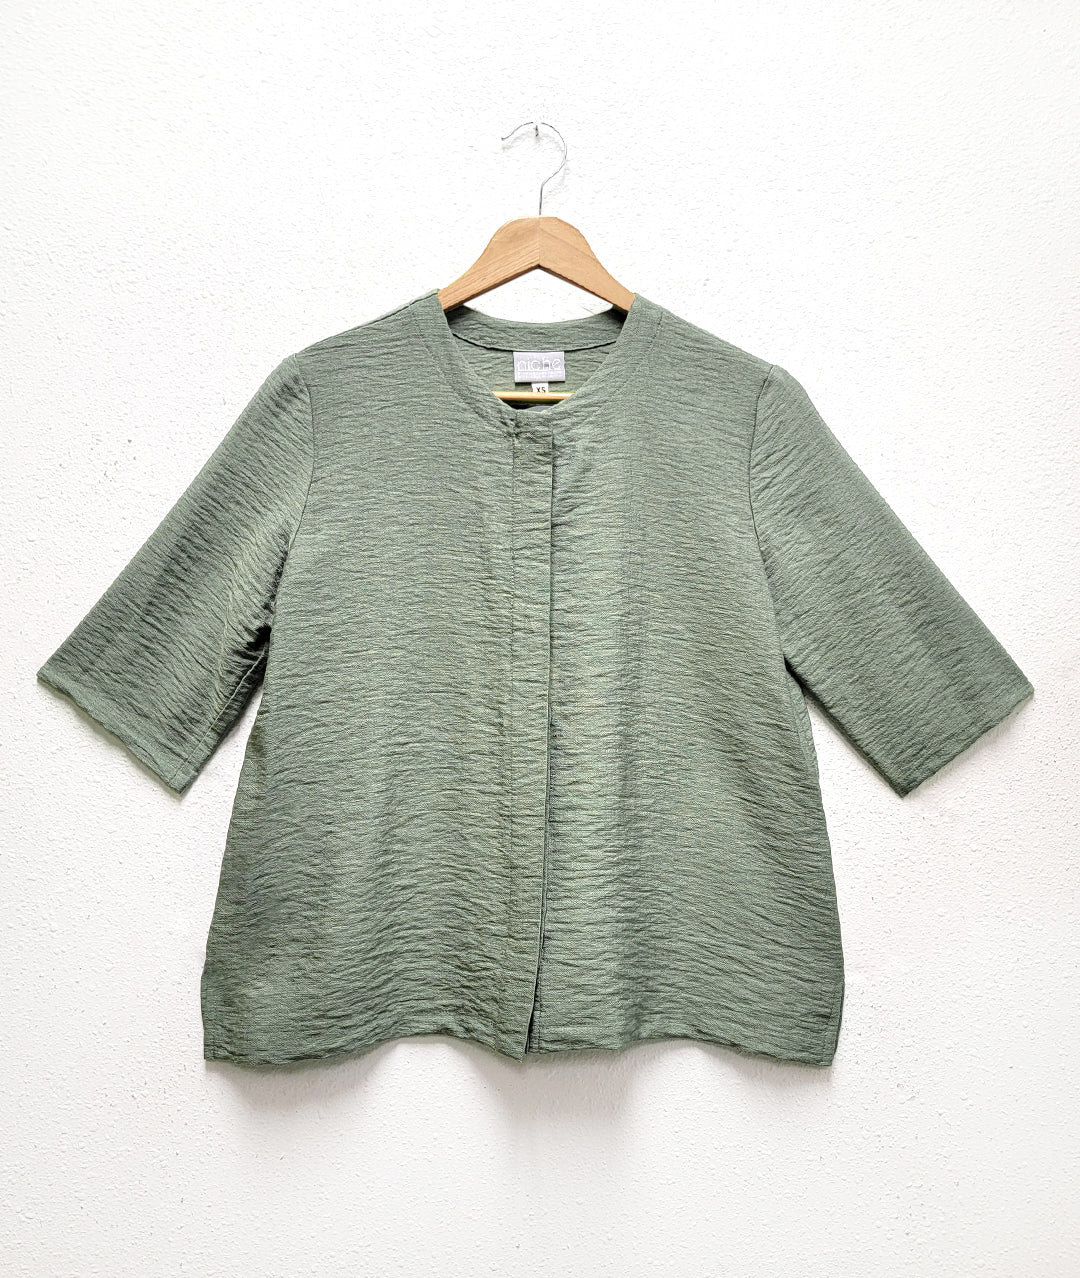 moss green top with 3/4 sleeves, a small slit on either side hem, a round neckline and buttons under a hidden placket